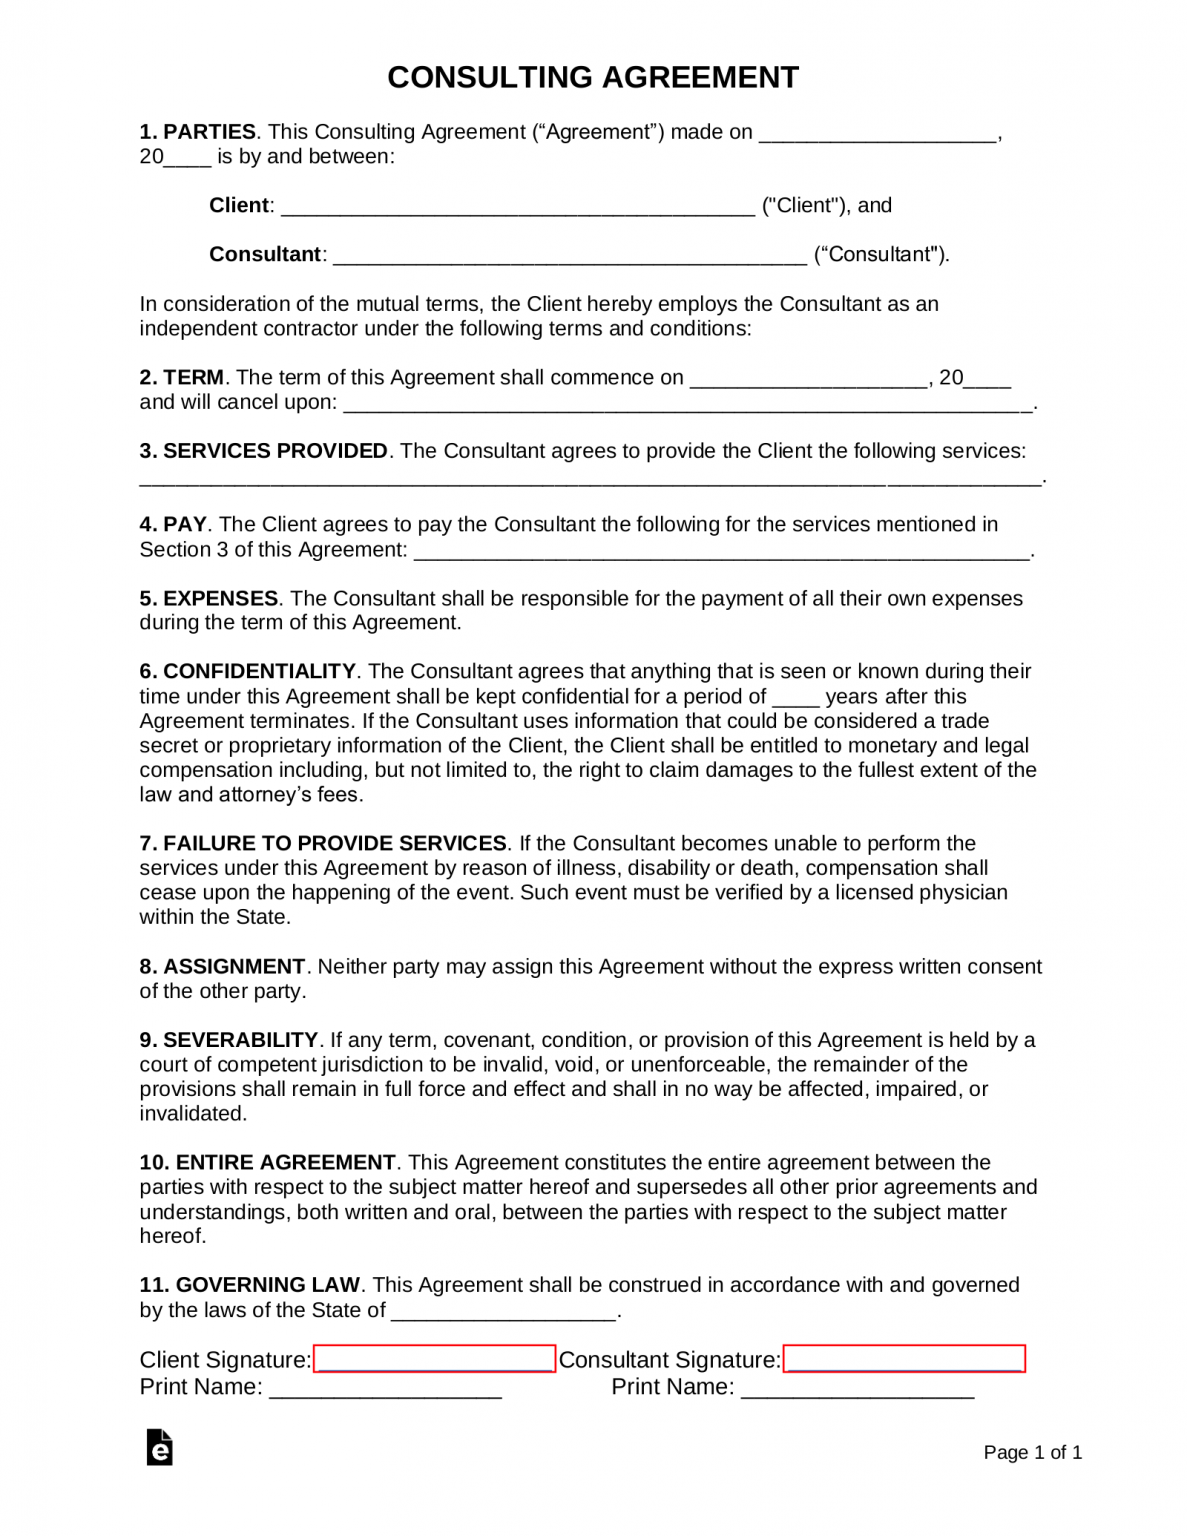 simple-contract-agreement-simple-contractor-agreement-template-simple